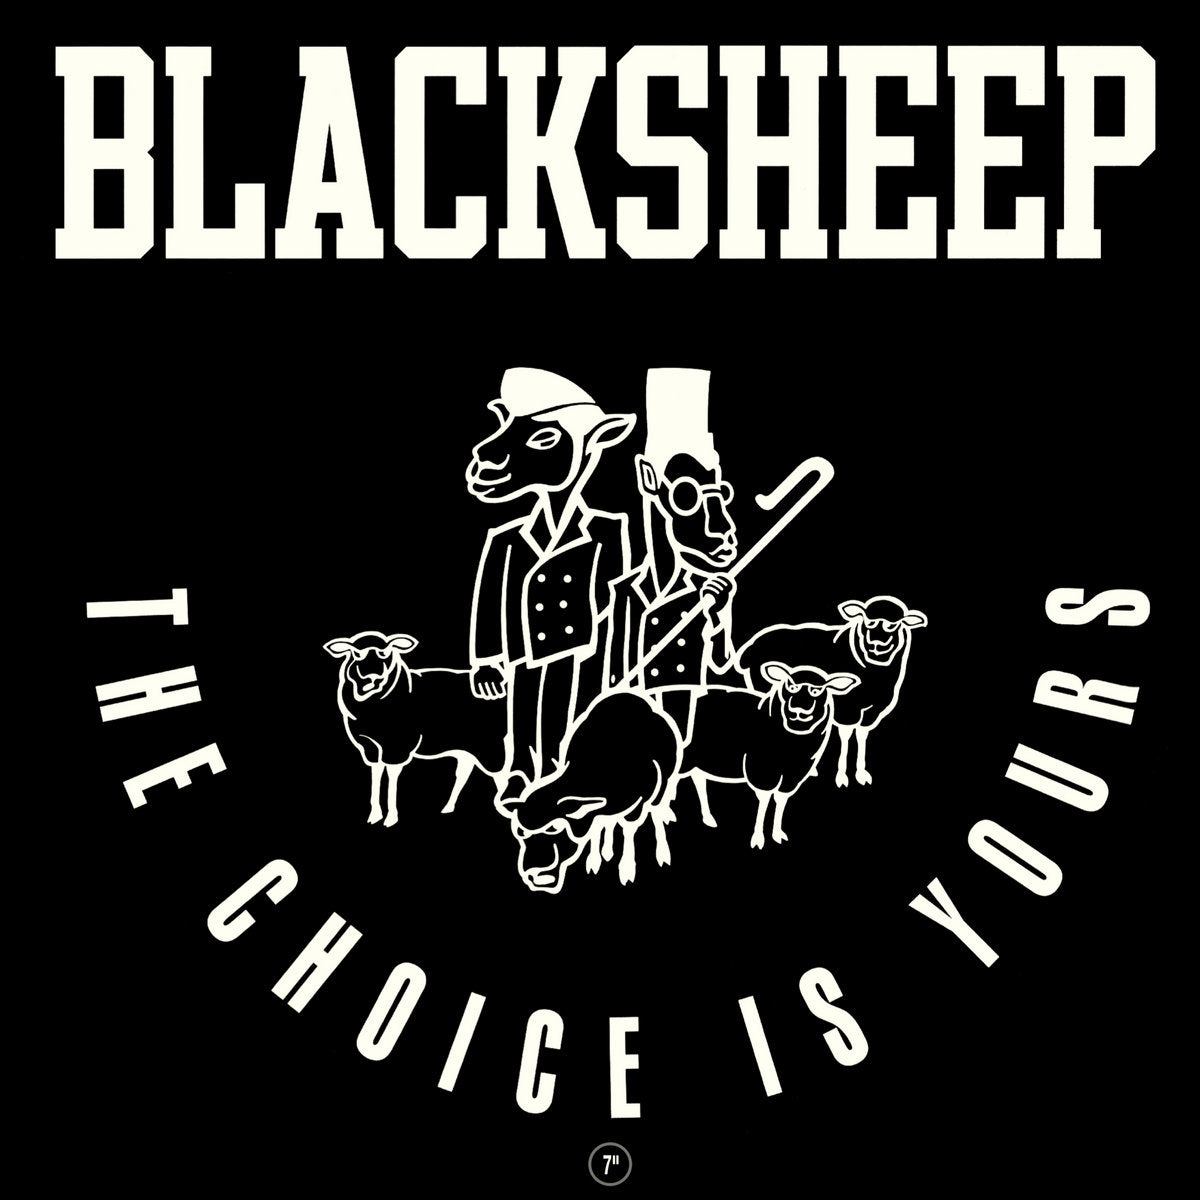 Black Sheep - The Choice Is Yours (7")